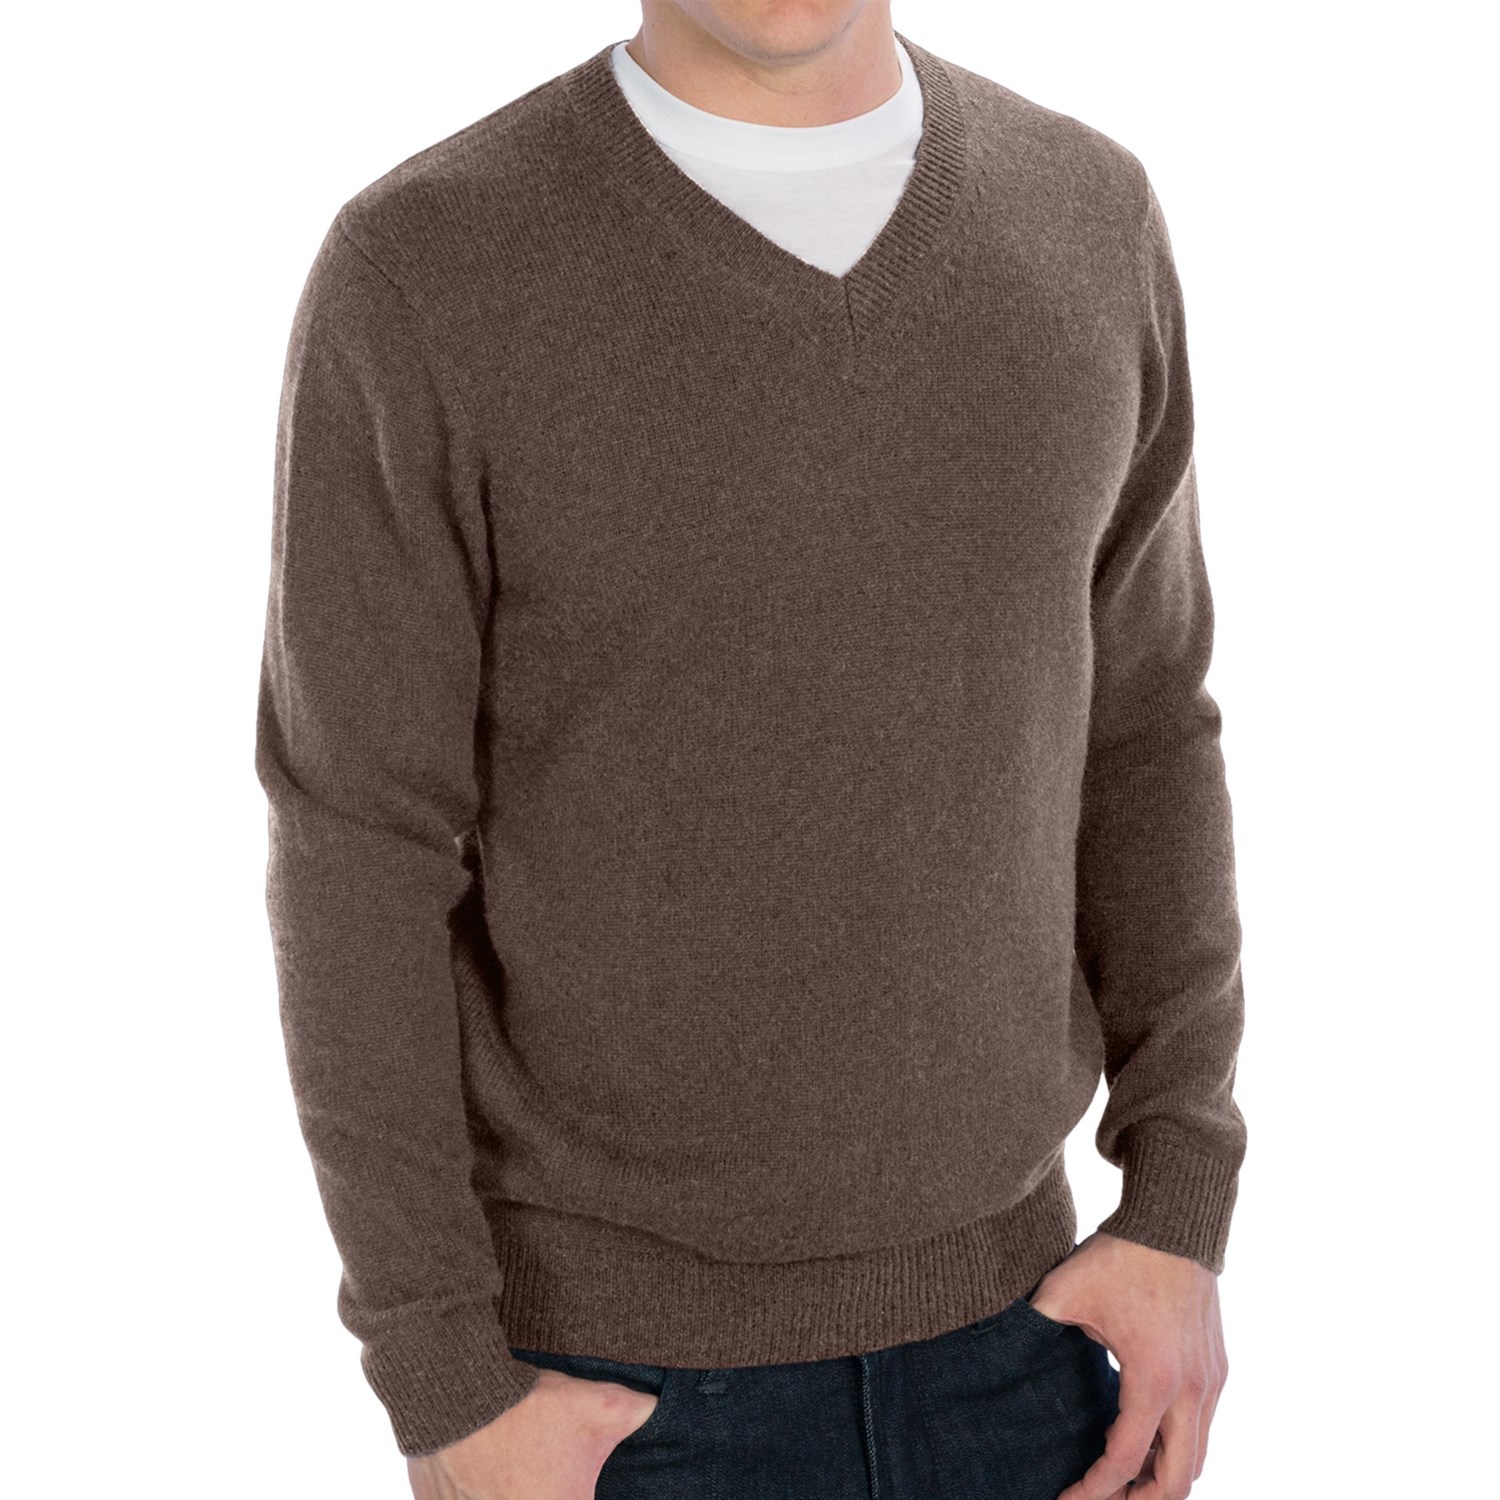 Forte Cashmere Elbow Patch Cashmere Sweater - V-Neck (For Men) - Save 75%